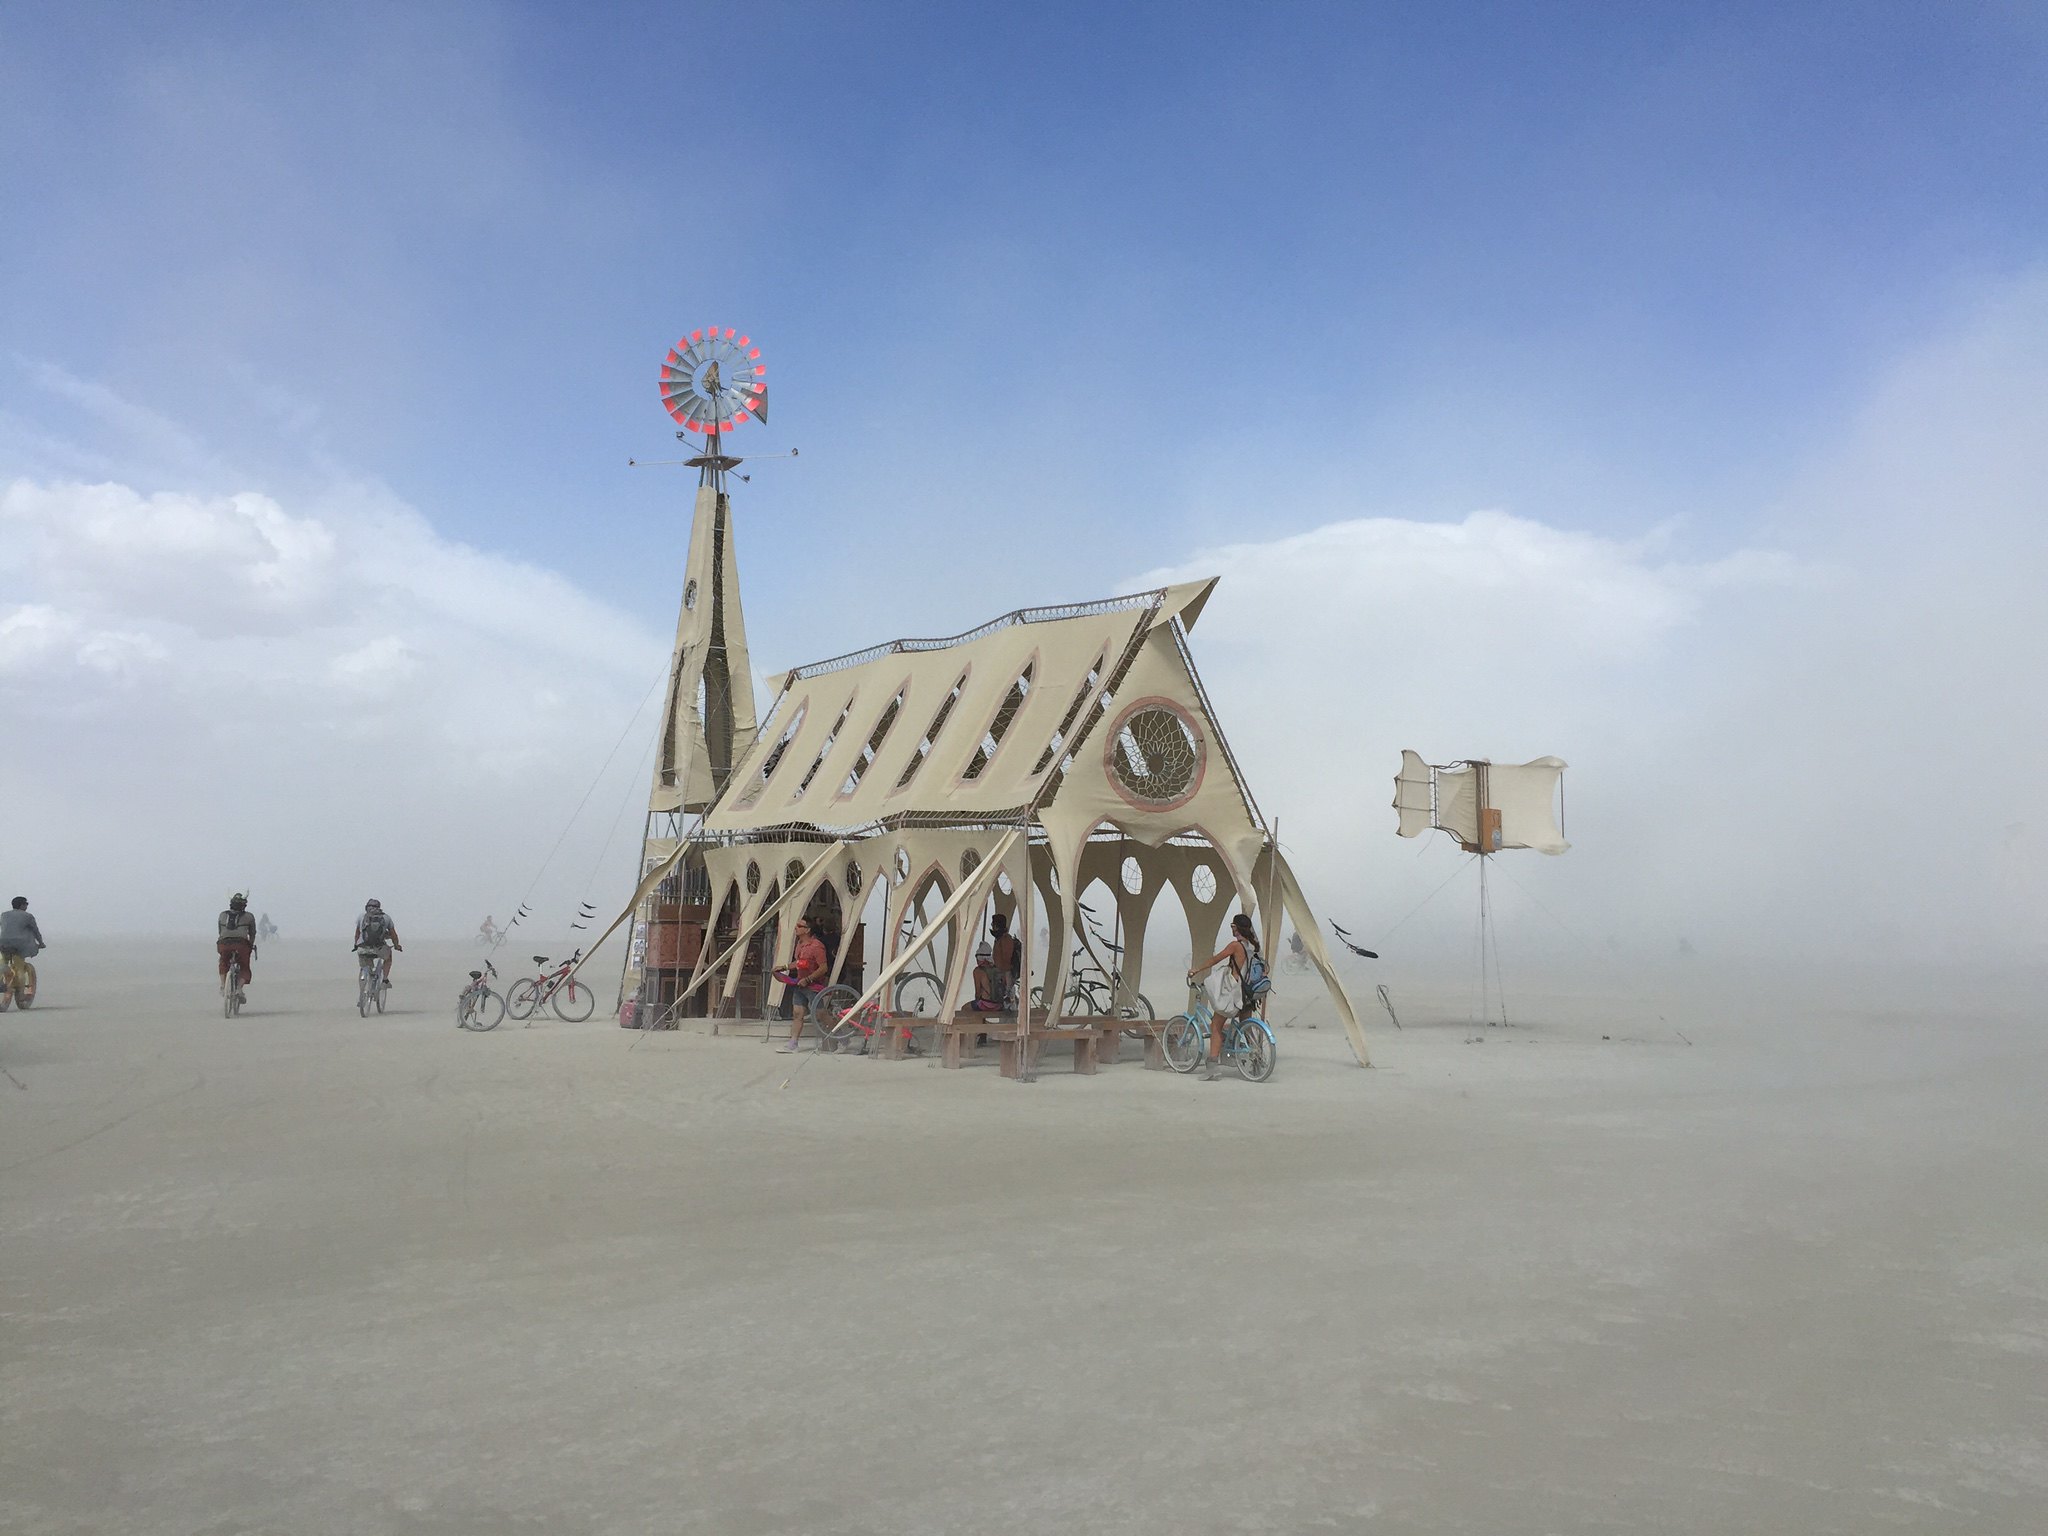 A wooden makeshift church temple with a red windmill on top in the dusty desert.